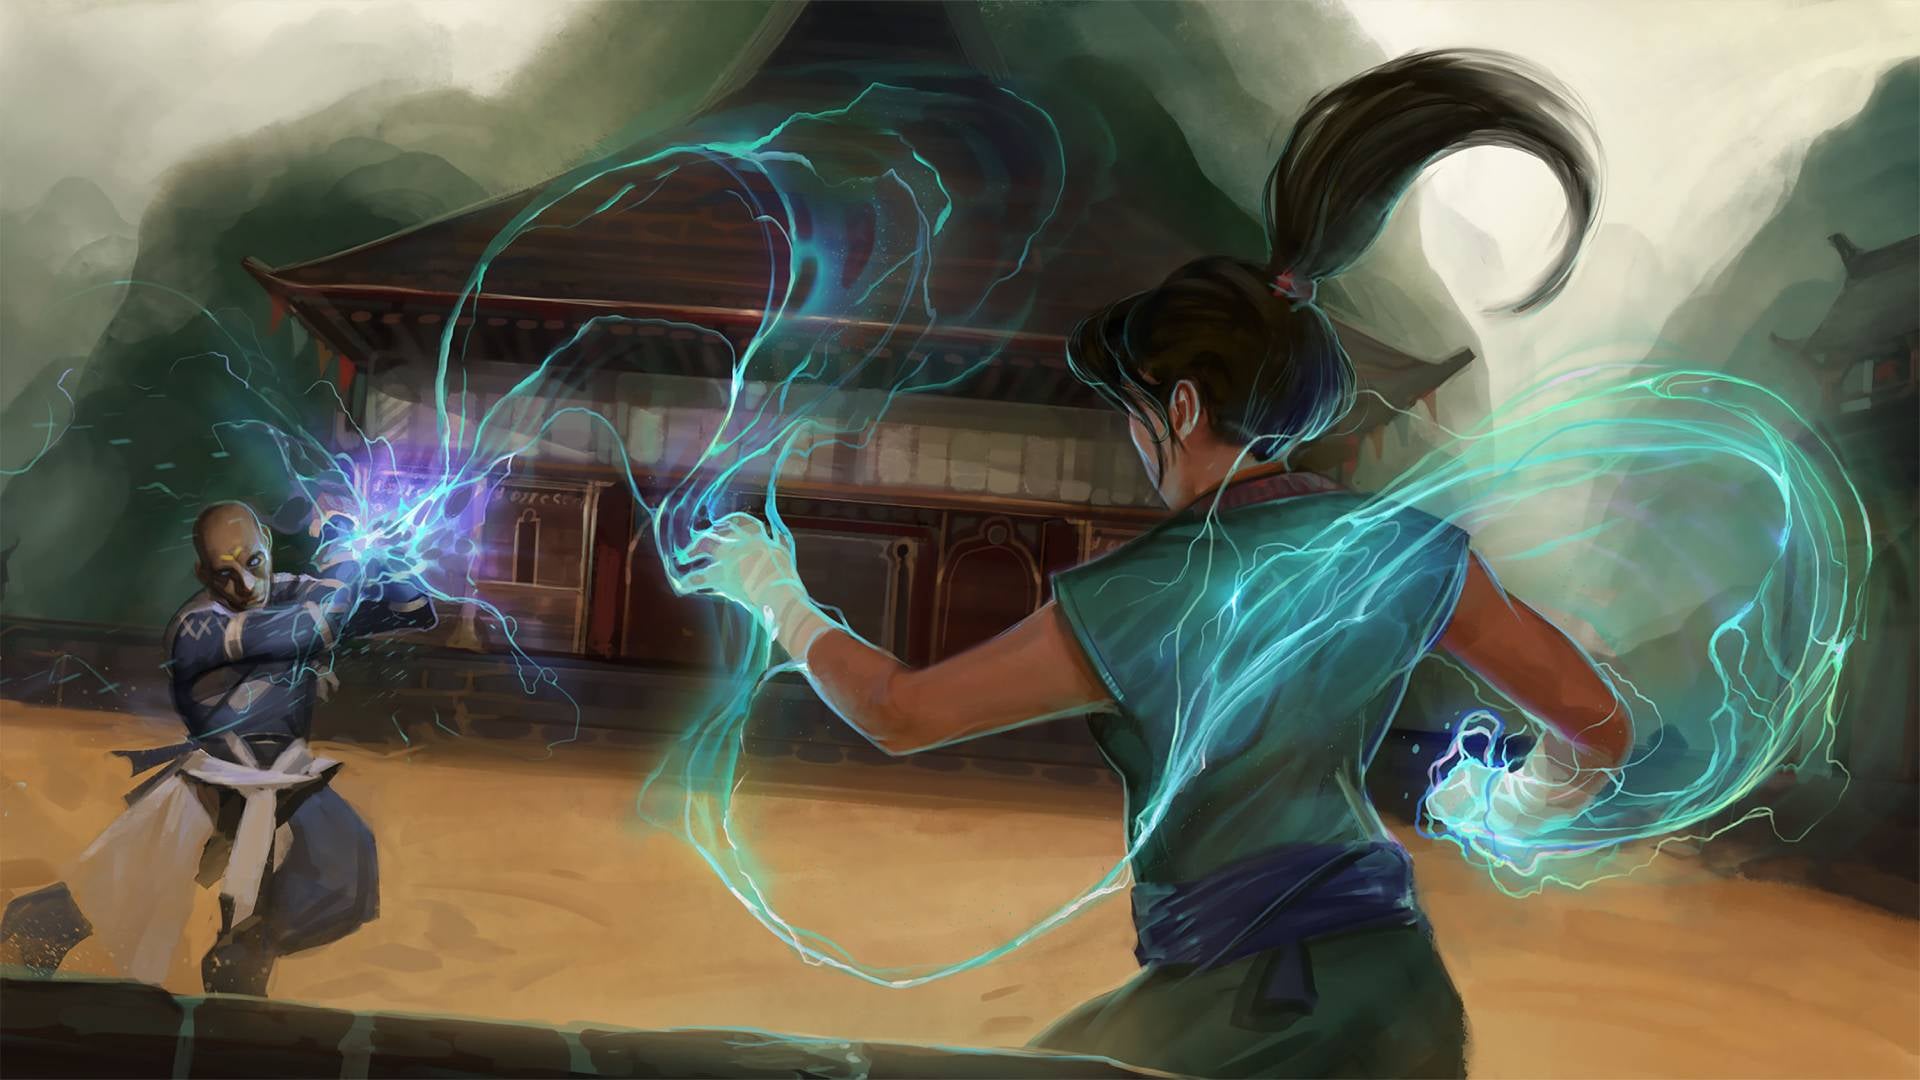 Two martial artists fight in the center of a wide arena. A spiraling bolt of lightning arcs from one’s outstretched hand and is reflected off the other’s crossed bracers.